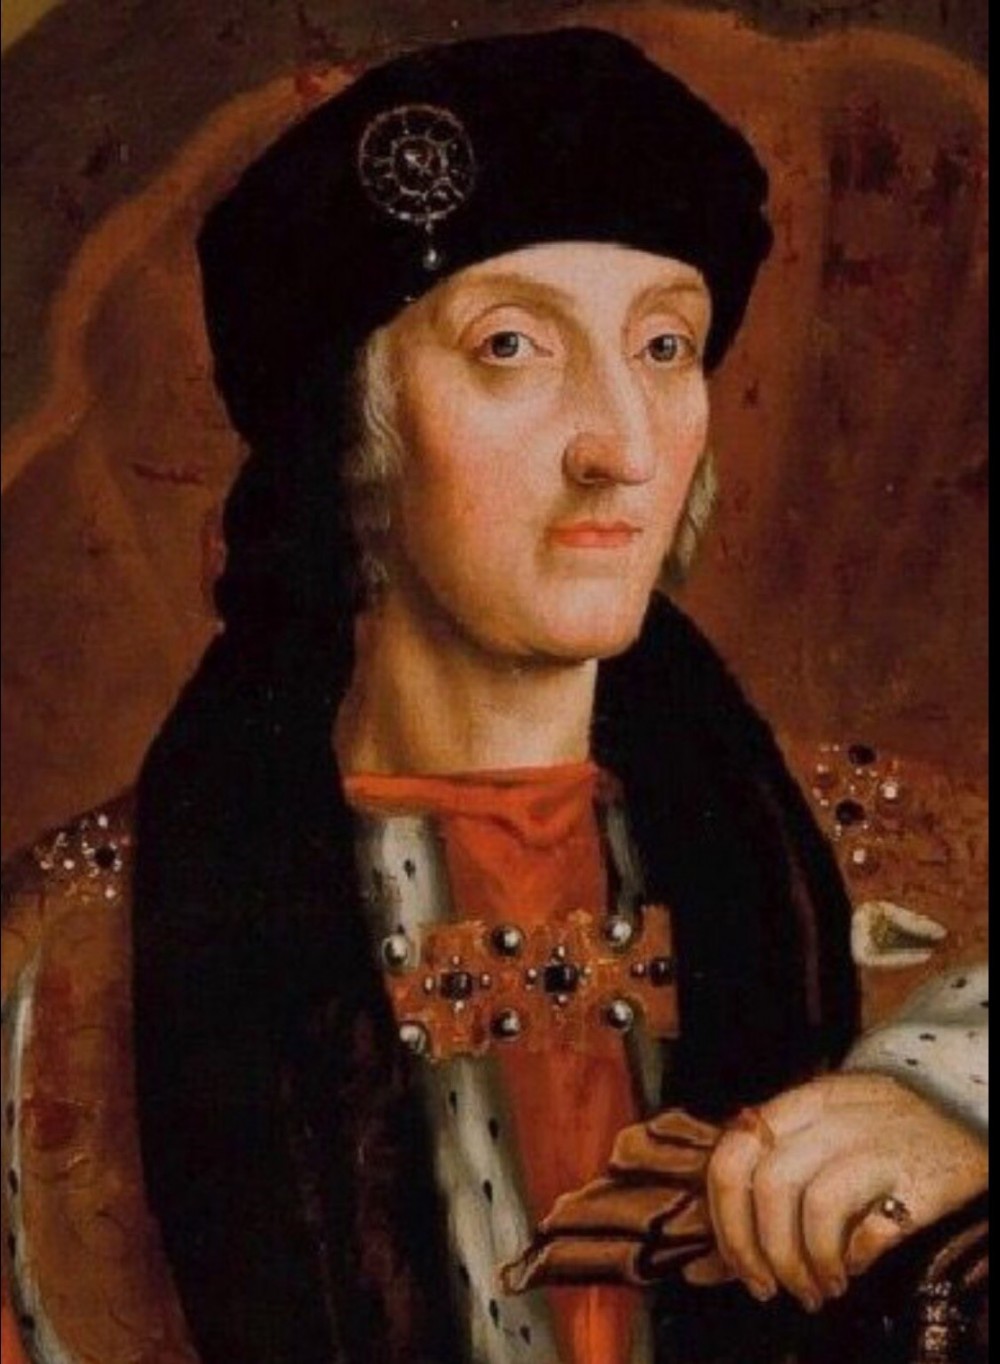 king henry vii 14851509 after hans holbein 16th17th century old master oil portraits tudor dynasty paintings whitehall palace